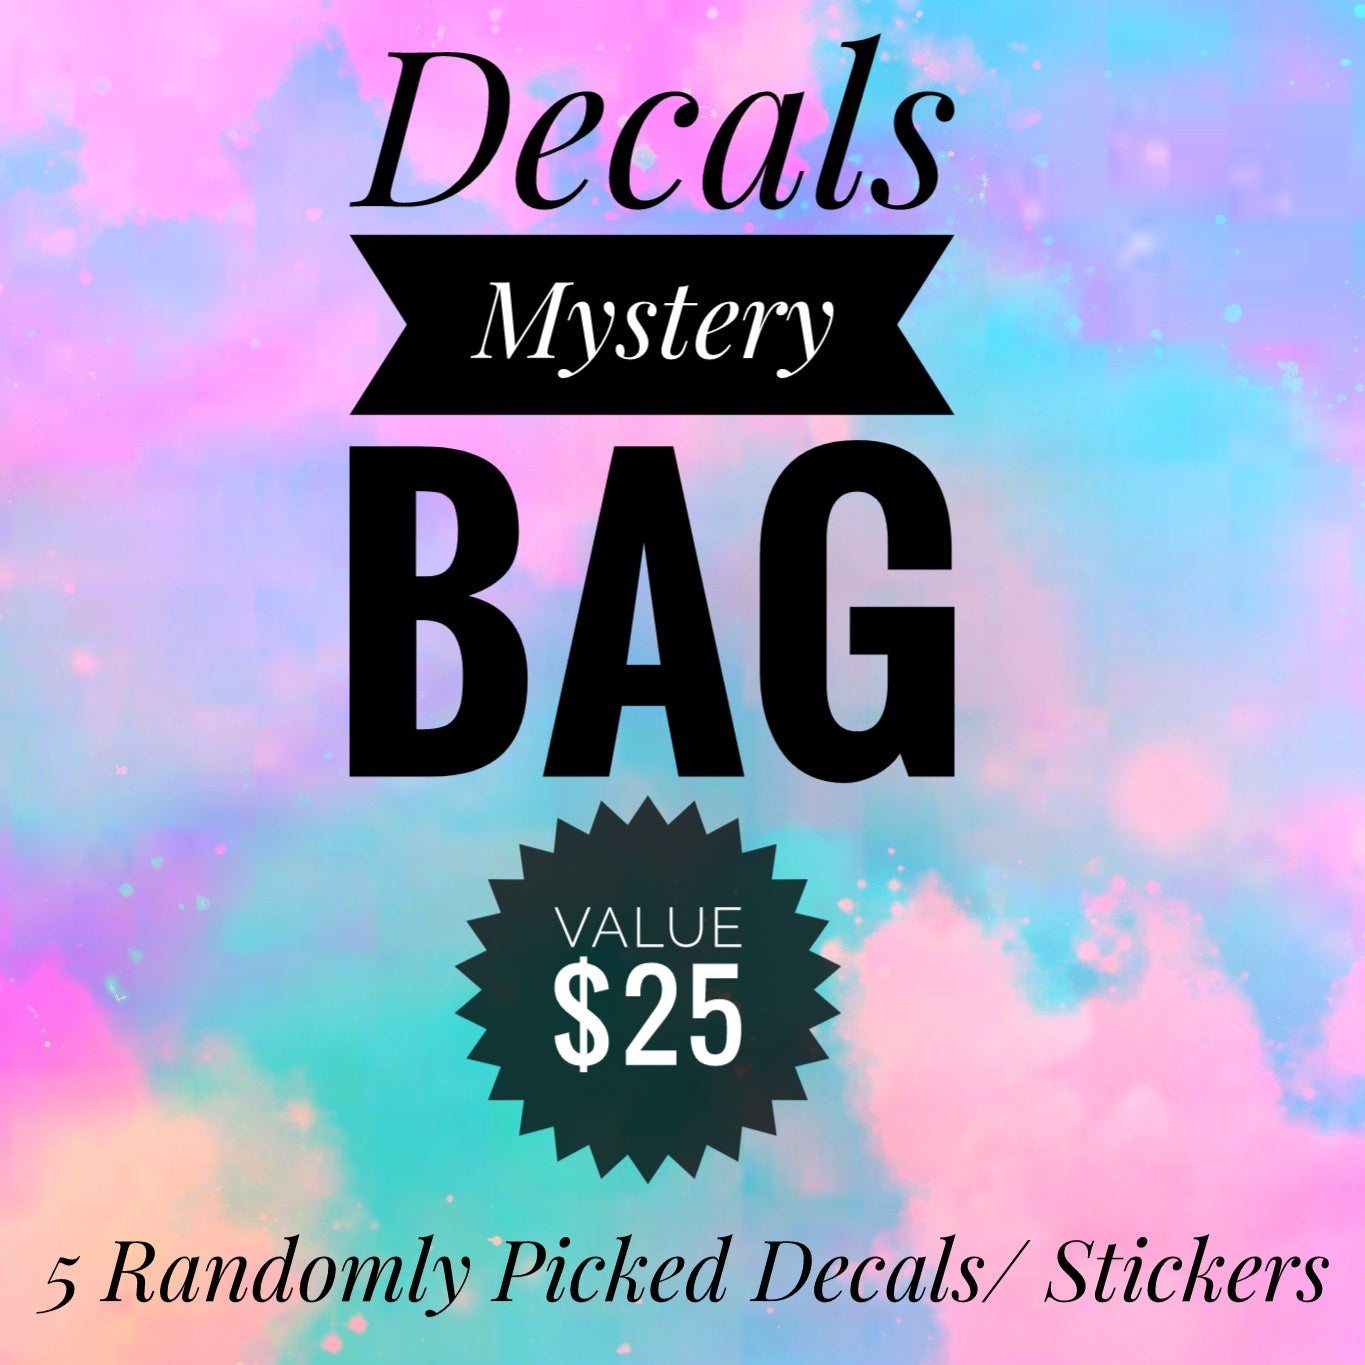 Decal Mystery Bag 5 stickers